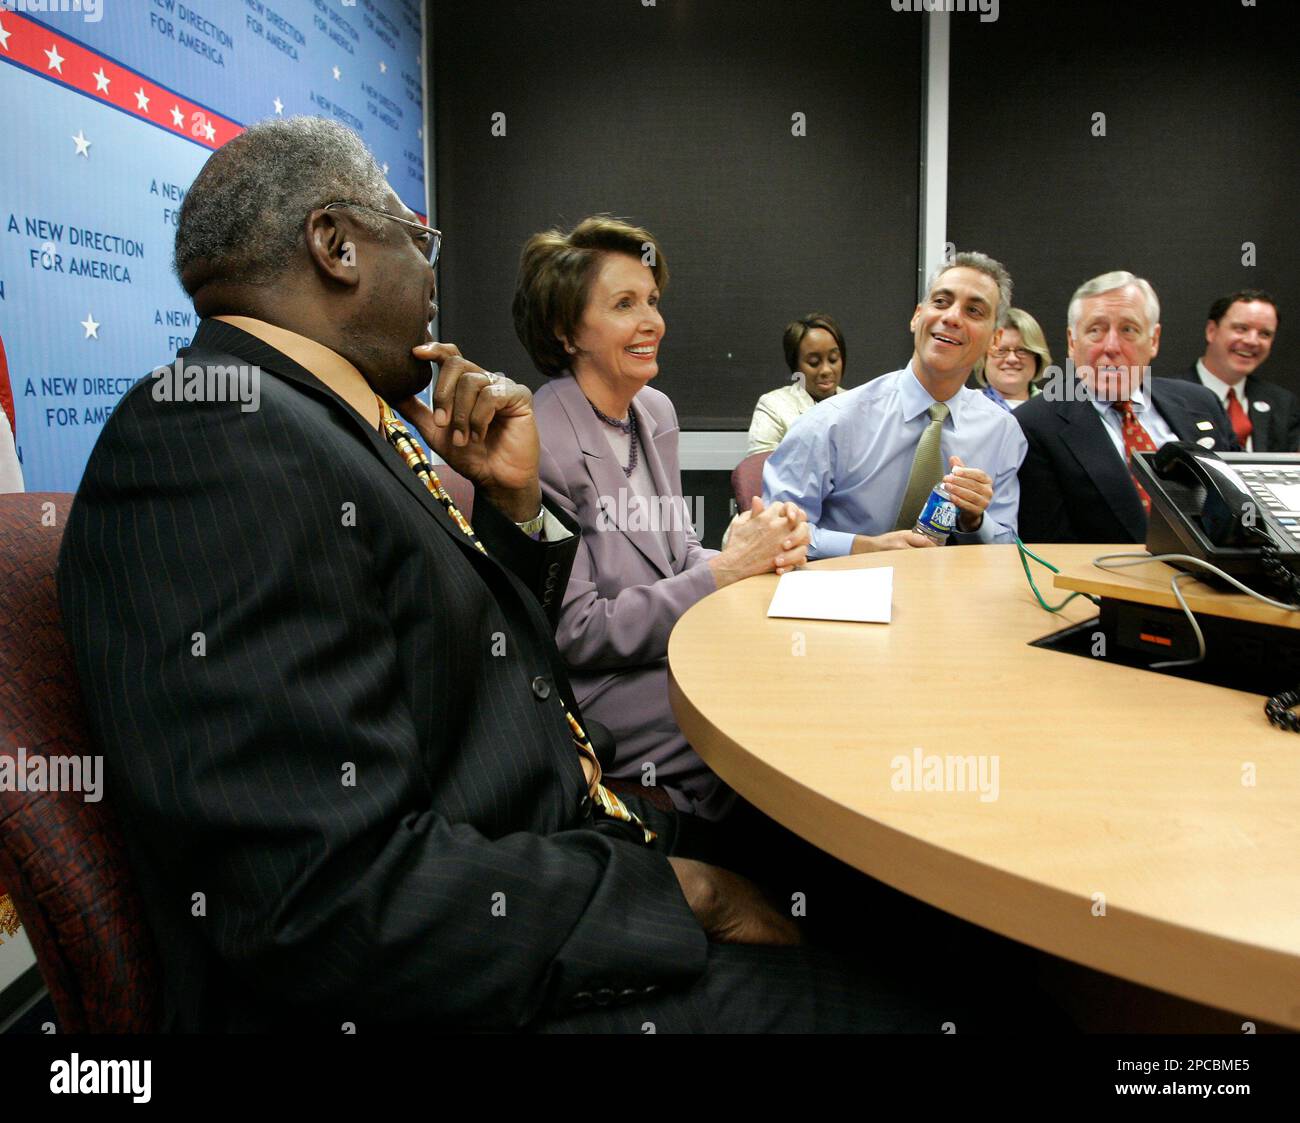 House Minority Leader Nancy Pelosi, D-Calif. watches election returns at the Democratic Congressional Campaign Committee headquarters in Washington Tuesday, Nov. 7, 2006. With her, left to right, are Rep. Jim Clyburn, D-S.C., Rep. Rahm Emanuel, D-Ill., and Rep. Steny Hoyer, D-Md. (AP Photo/Gerald Herbert) Stock Photo